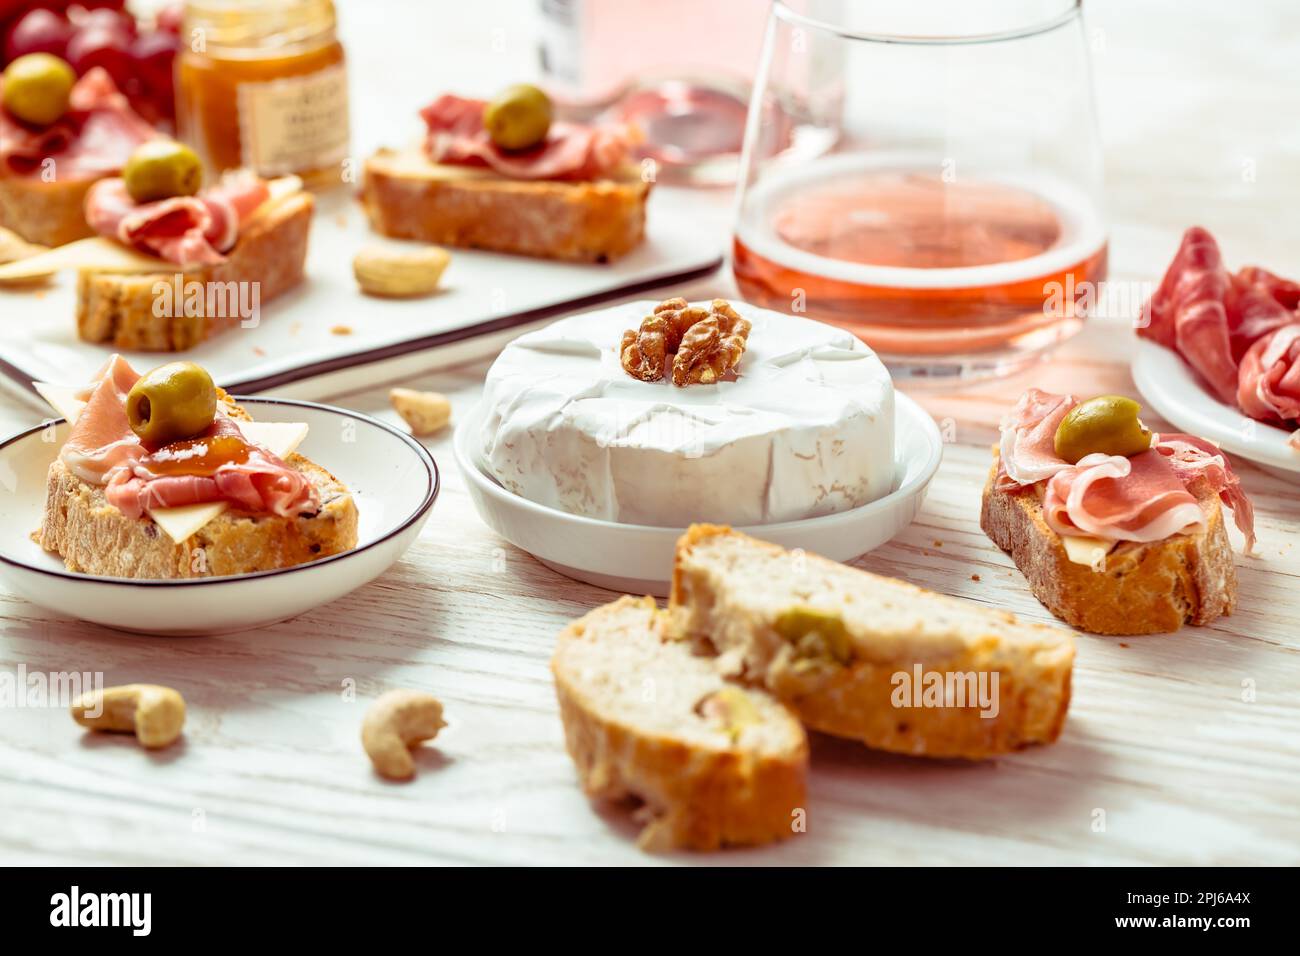 Appetizers and open sandwiches with Italian antipasti, camembert, Parma ham and rose wine on wooden table Stock Photo